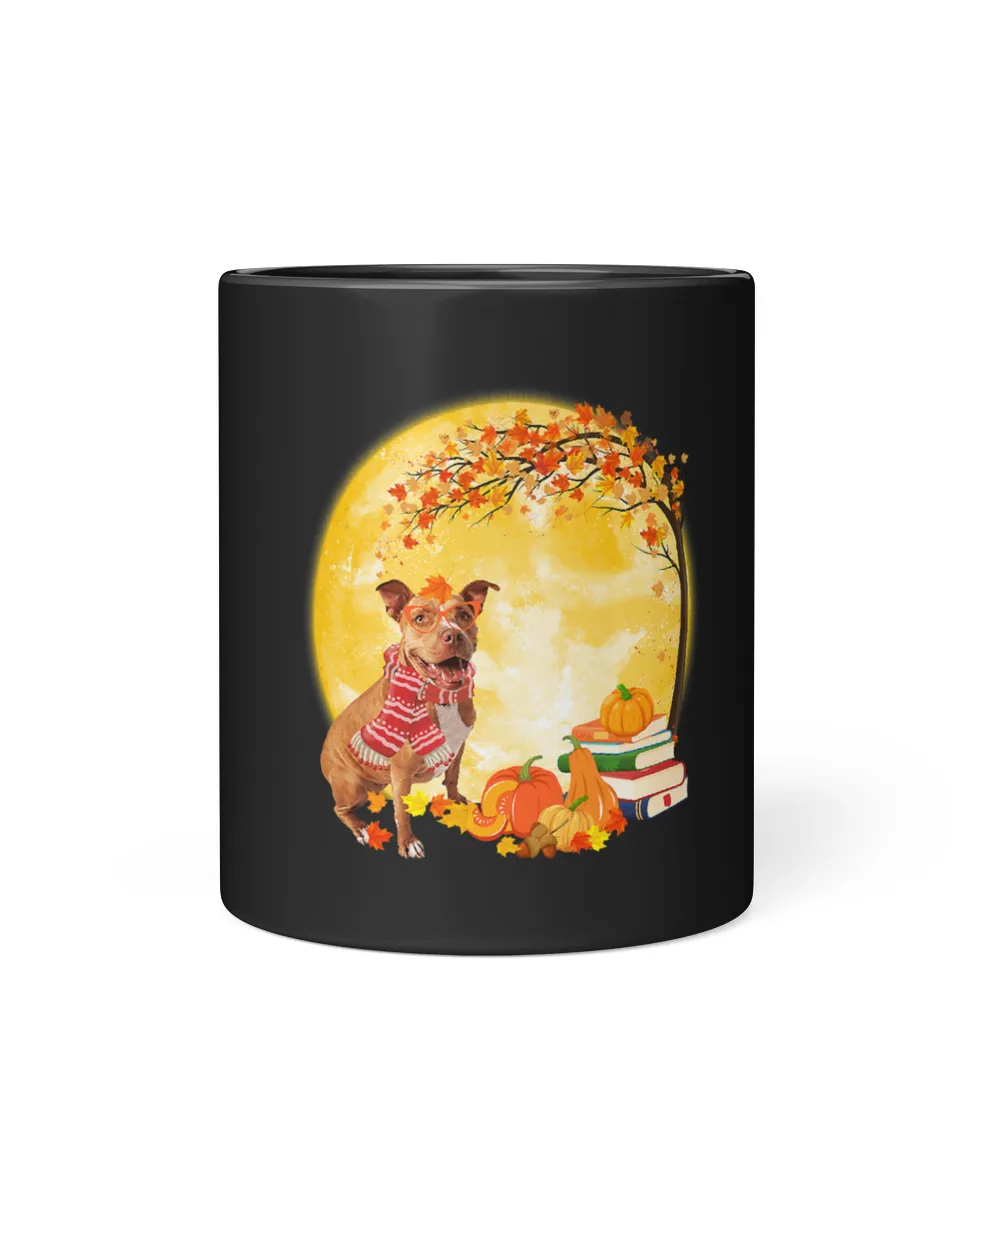 Funny Pitbull Dog Leaf Fall Hello Autumn Thanksgiving Outfit557